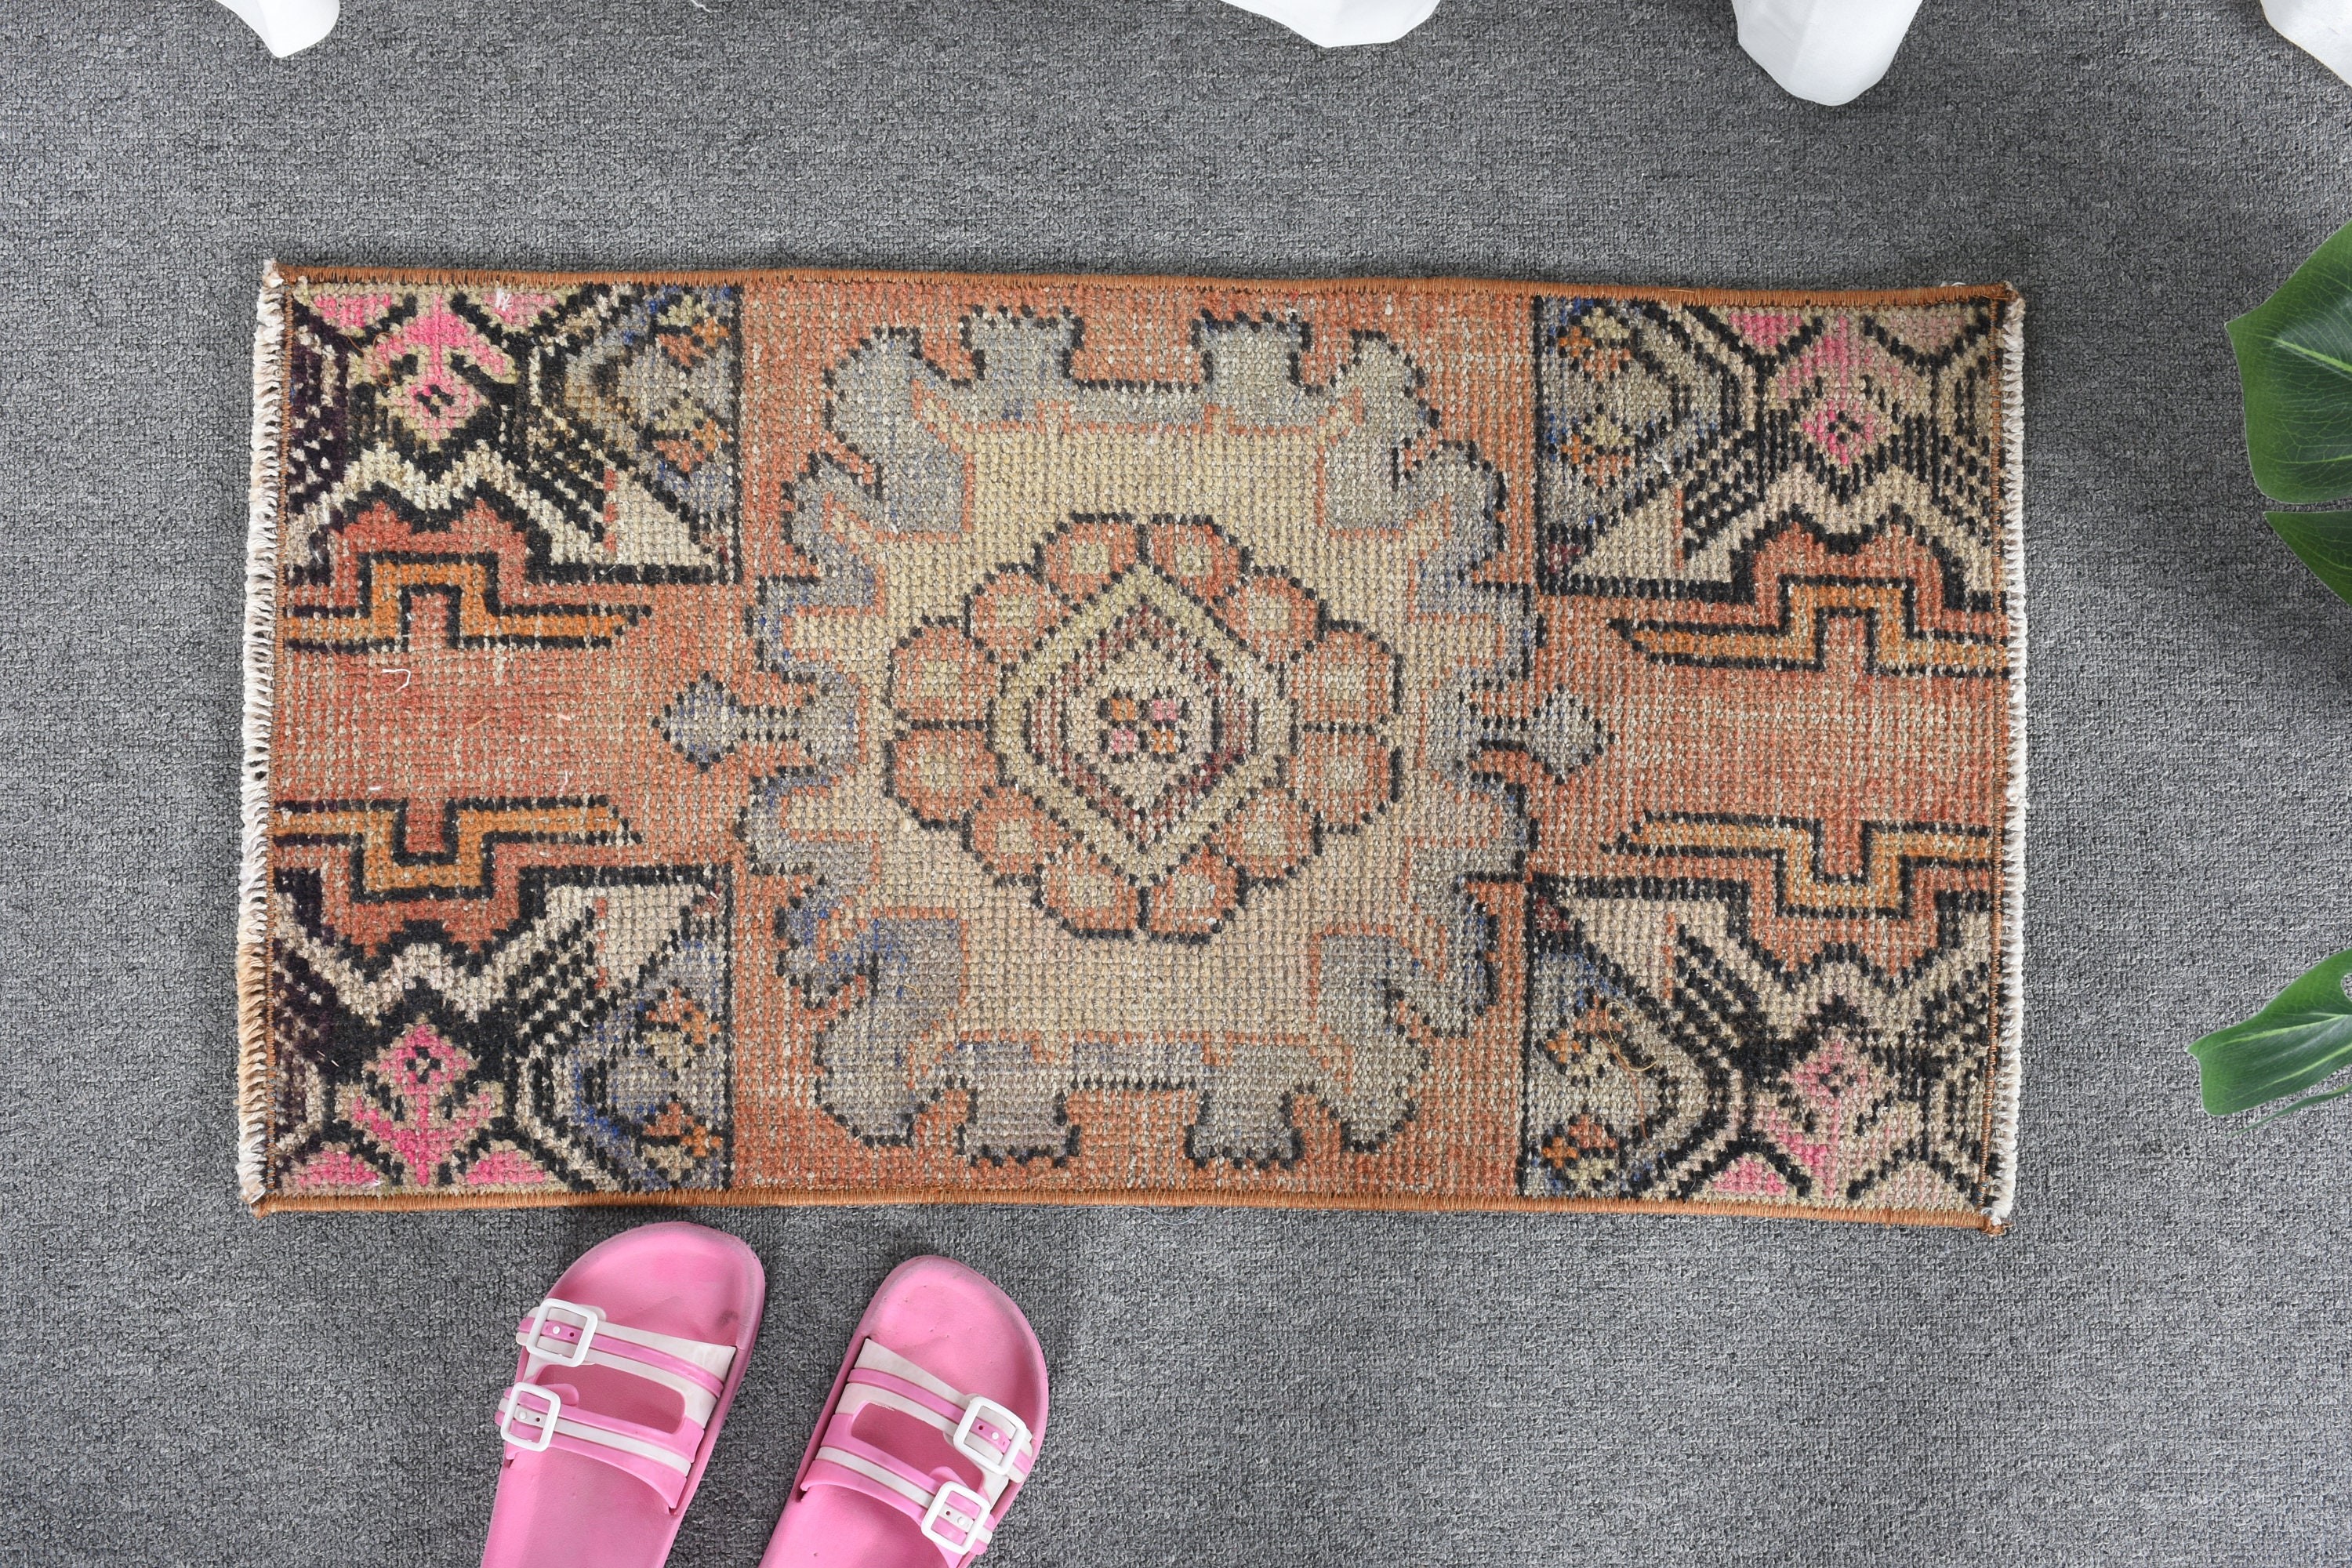 Car Mat Rugs, Vintage Rug, Turkish Rug, Brown Antique Rugs, Bath Rug, Distressed Rug, 1.3x2.5 ft Small Rug, Antique Rug, Home Decor Rugs